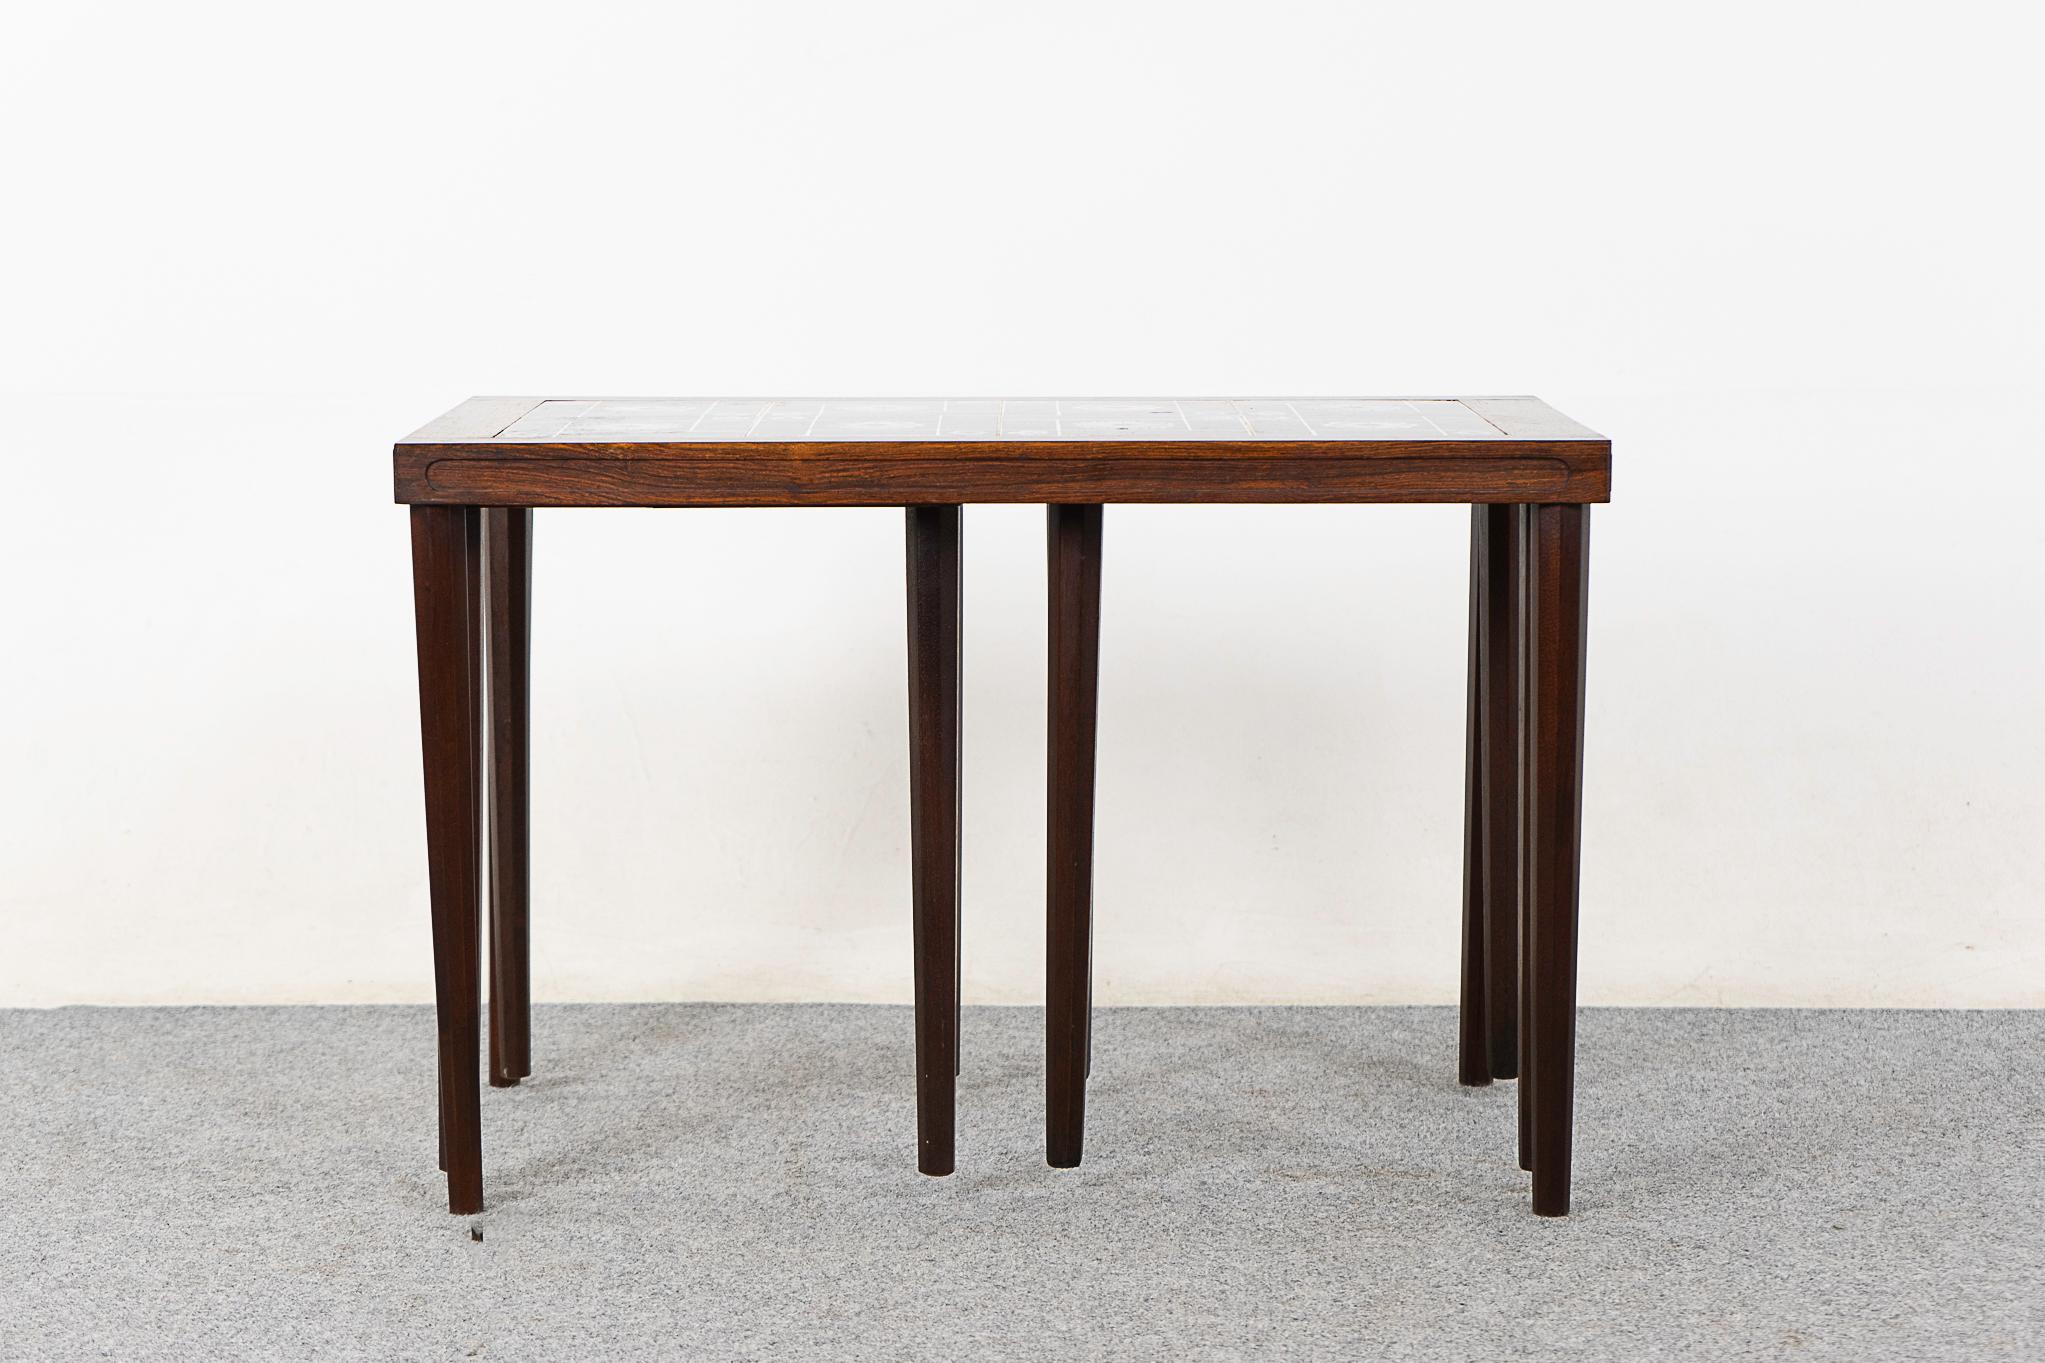 Rosewood and tile mid-century nesting tables, circa 1960's. Space saving design, the footprint of one table with the functionality of three! The geometric/floral motif contrasts beautifully with the warm tone of the rosewood.

Unrestored item, some